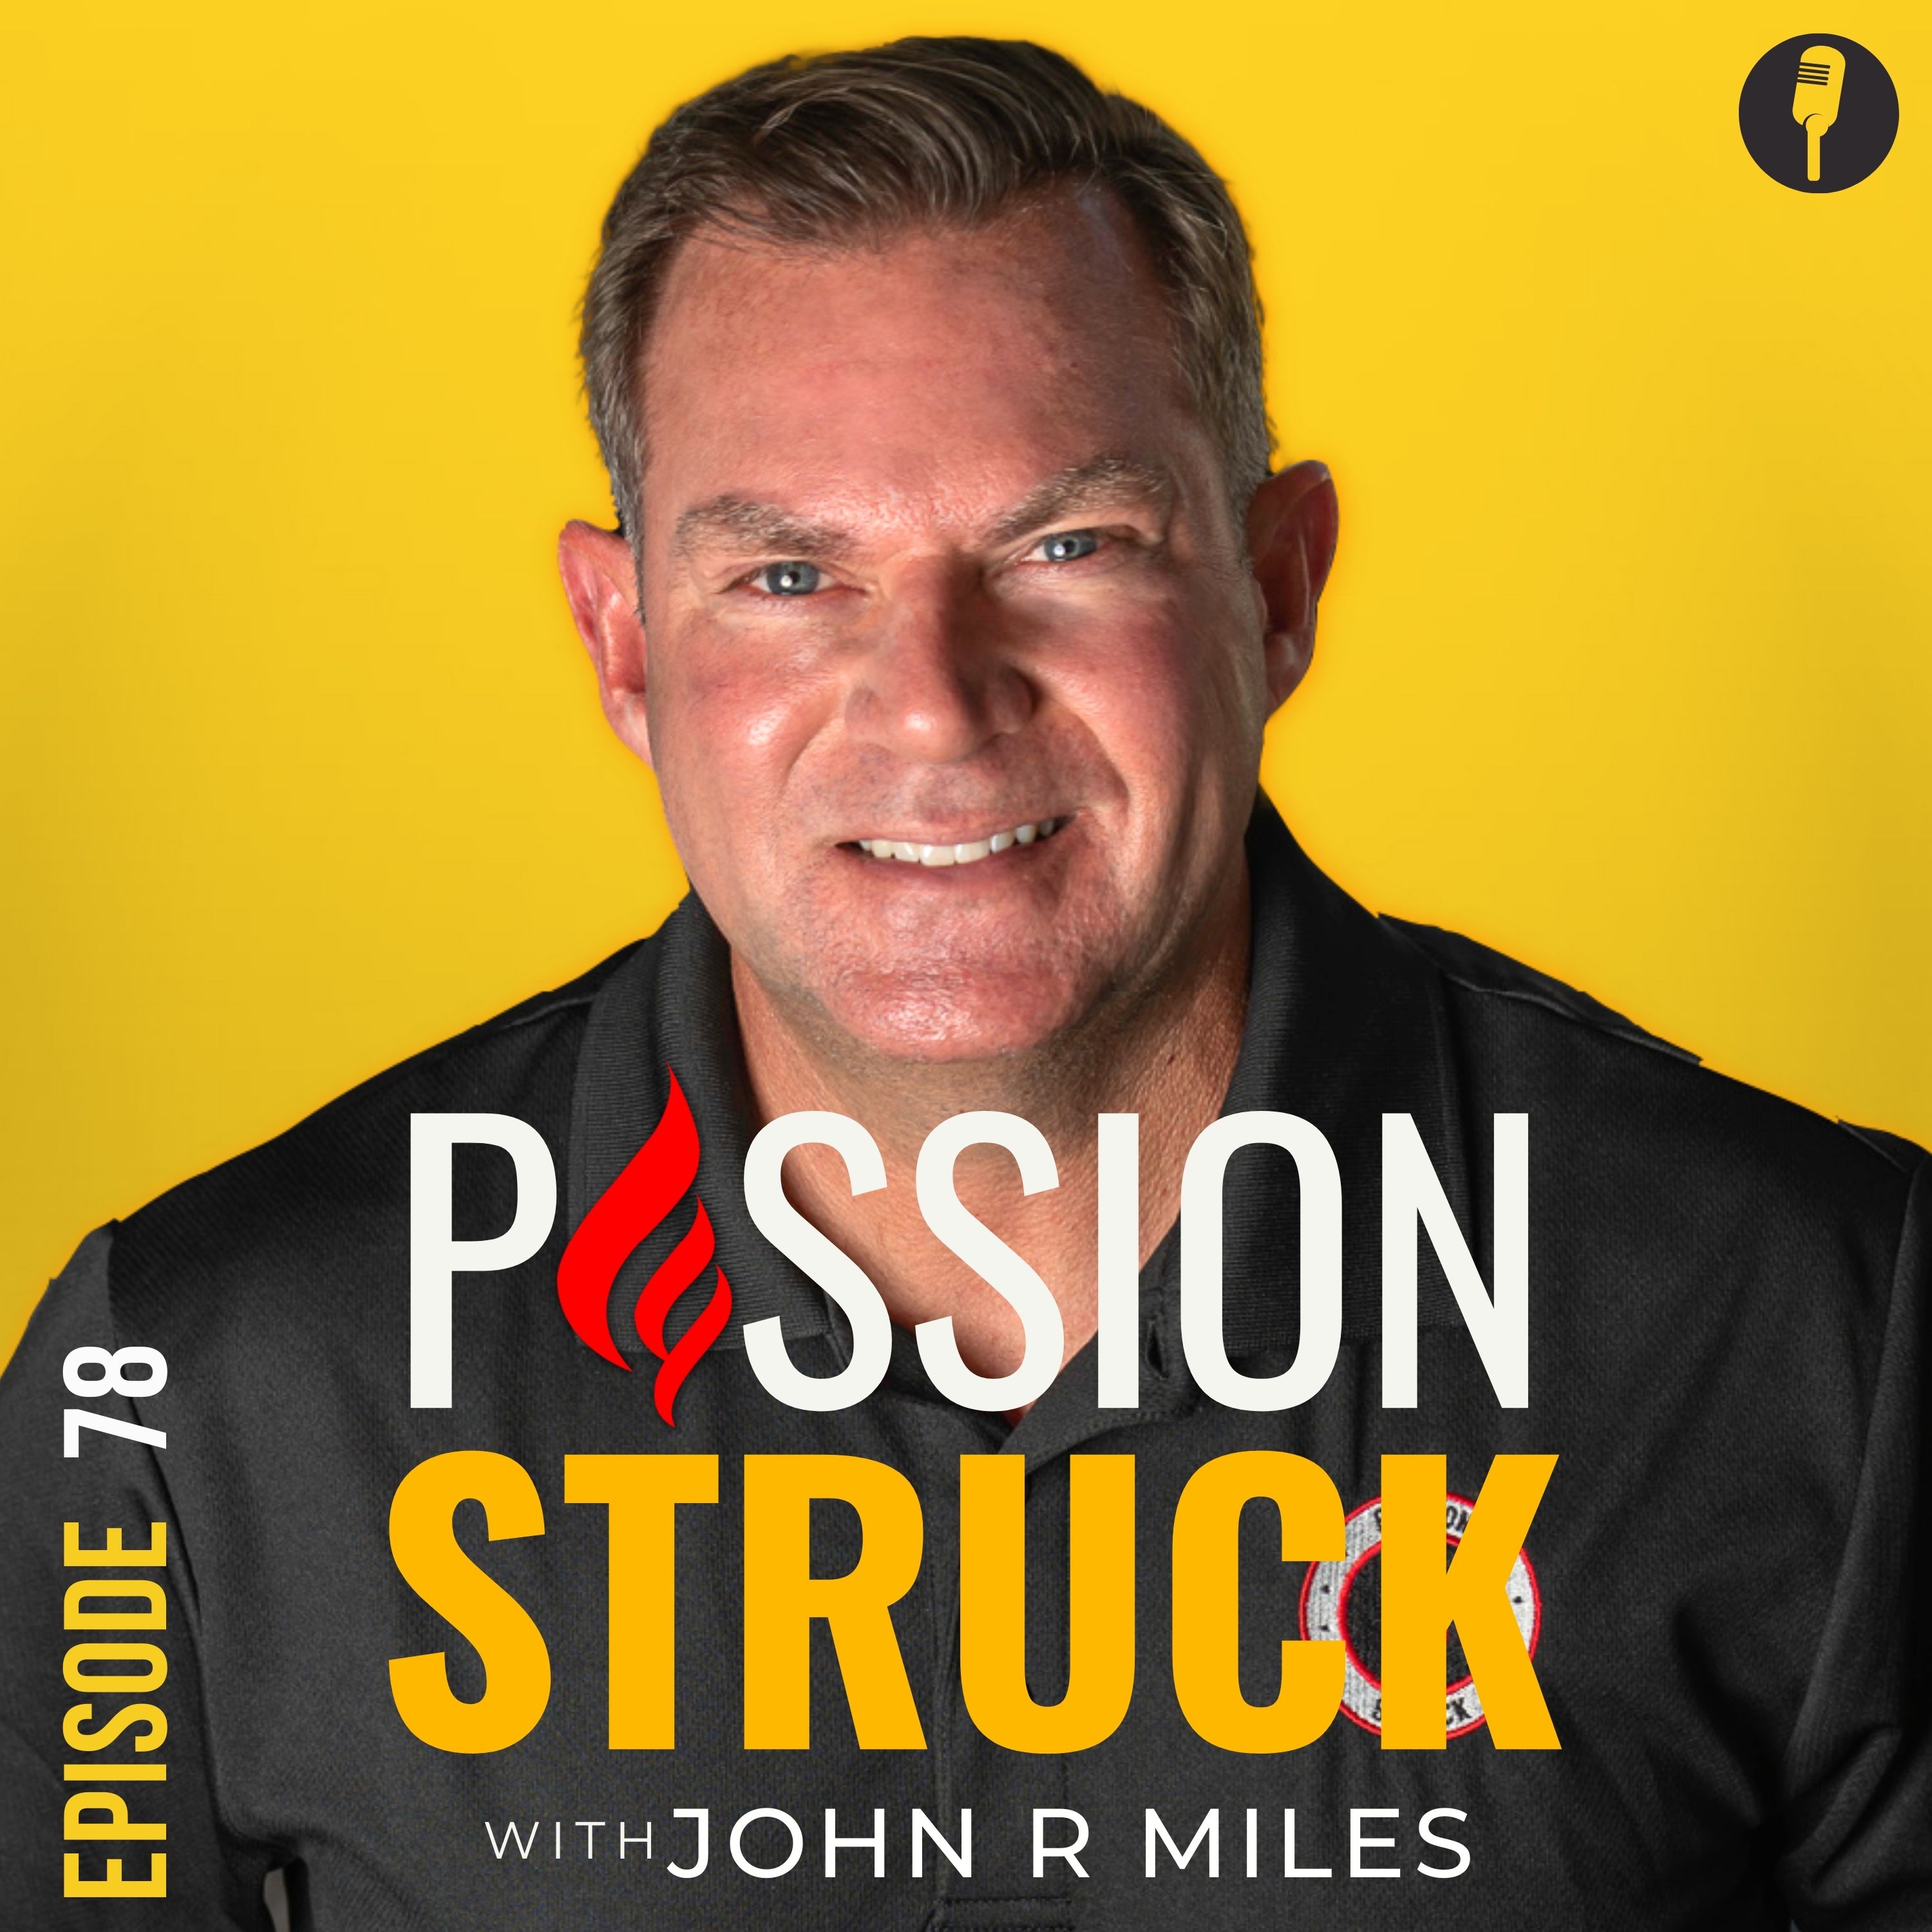 Passion Struck Podcast Cover for Episode 78 with John R. Miles